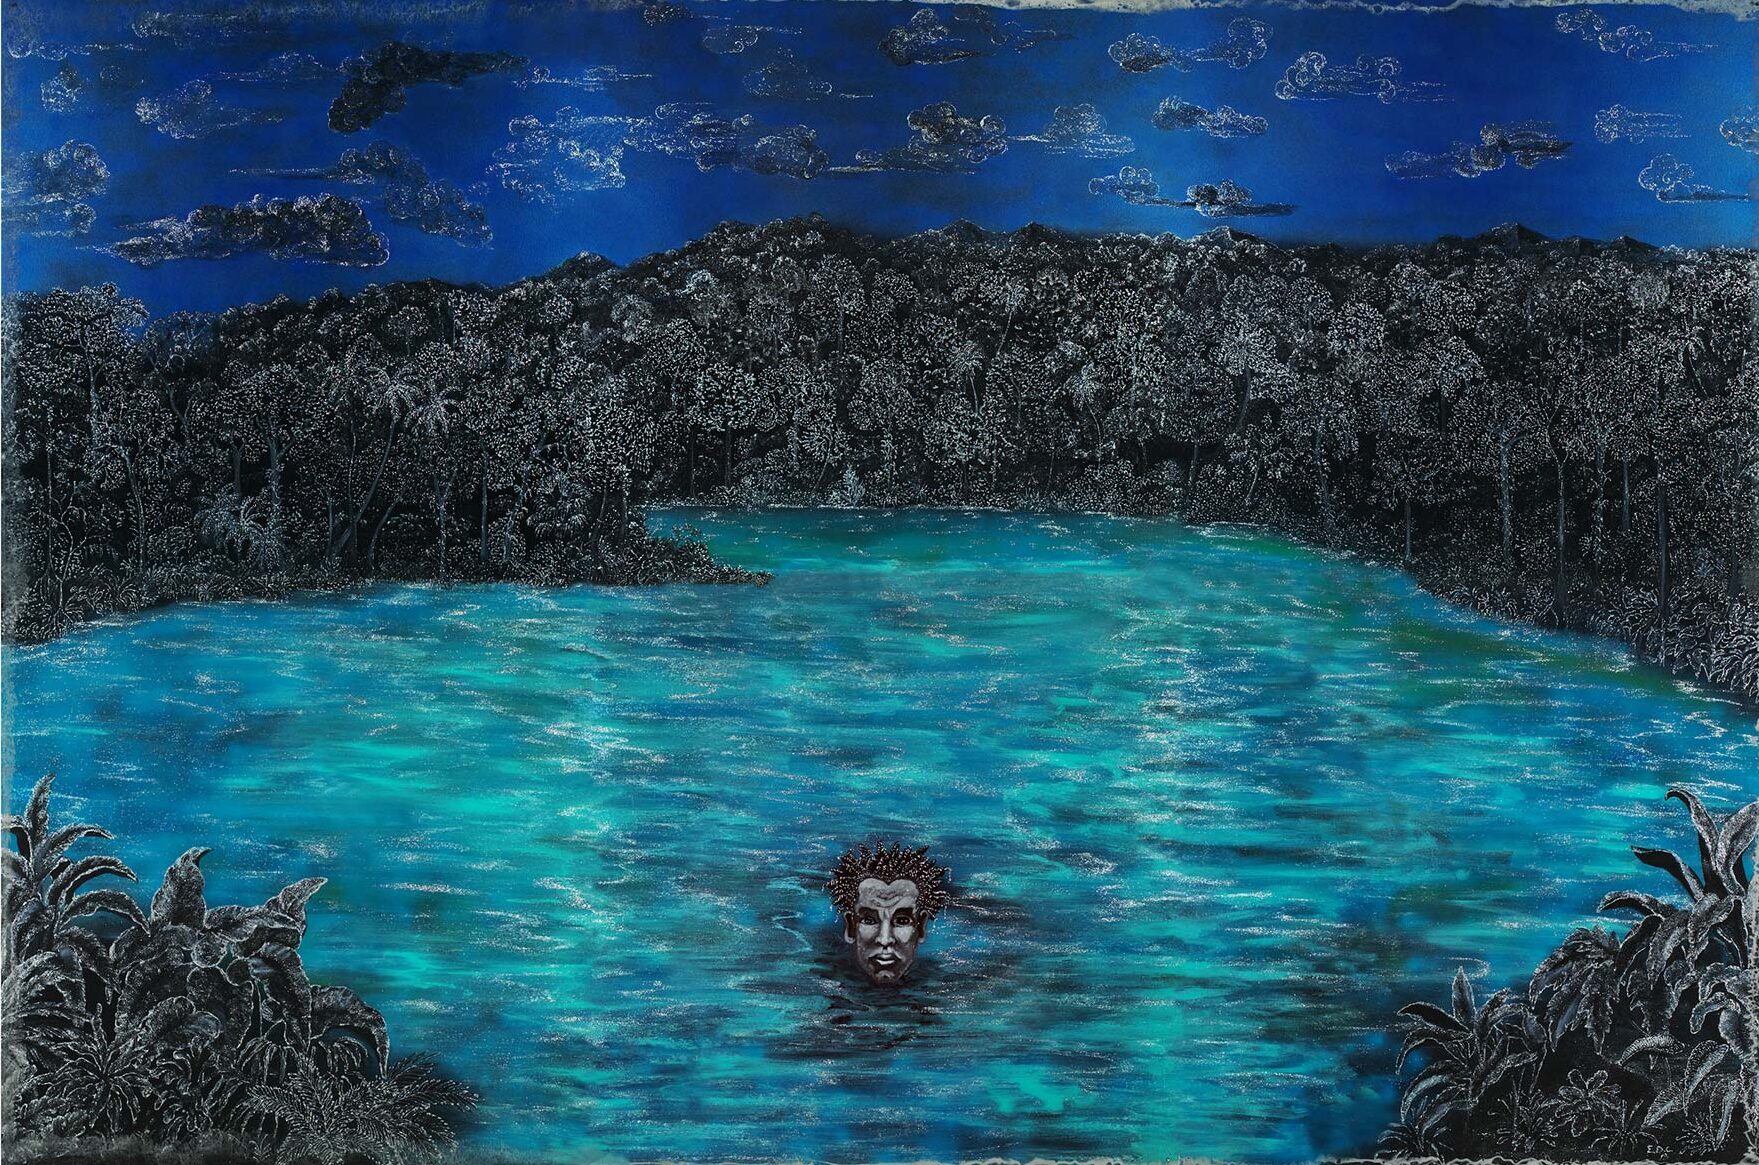 Landscape painting in blacks and blues depicting a large body of shimmering light blue water surrounded by dark trees and flora. A man's head with different sized eyeballs is peering out of the water near the bottom center and is staring at the viewer.